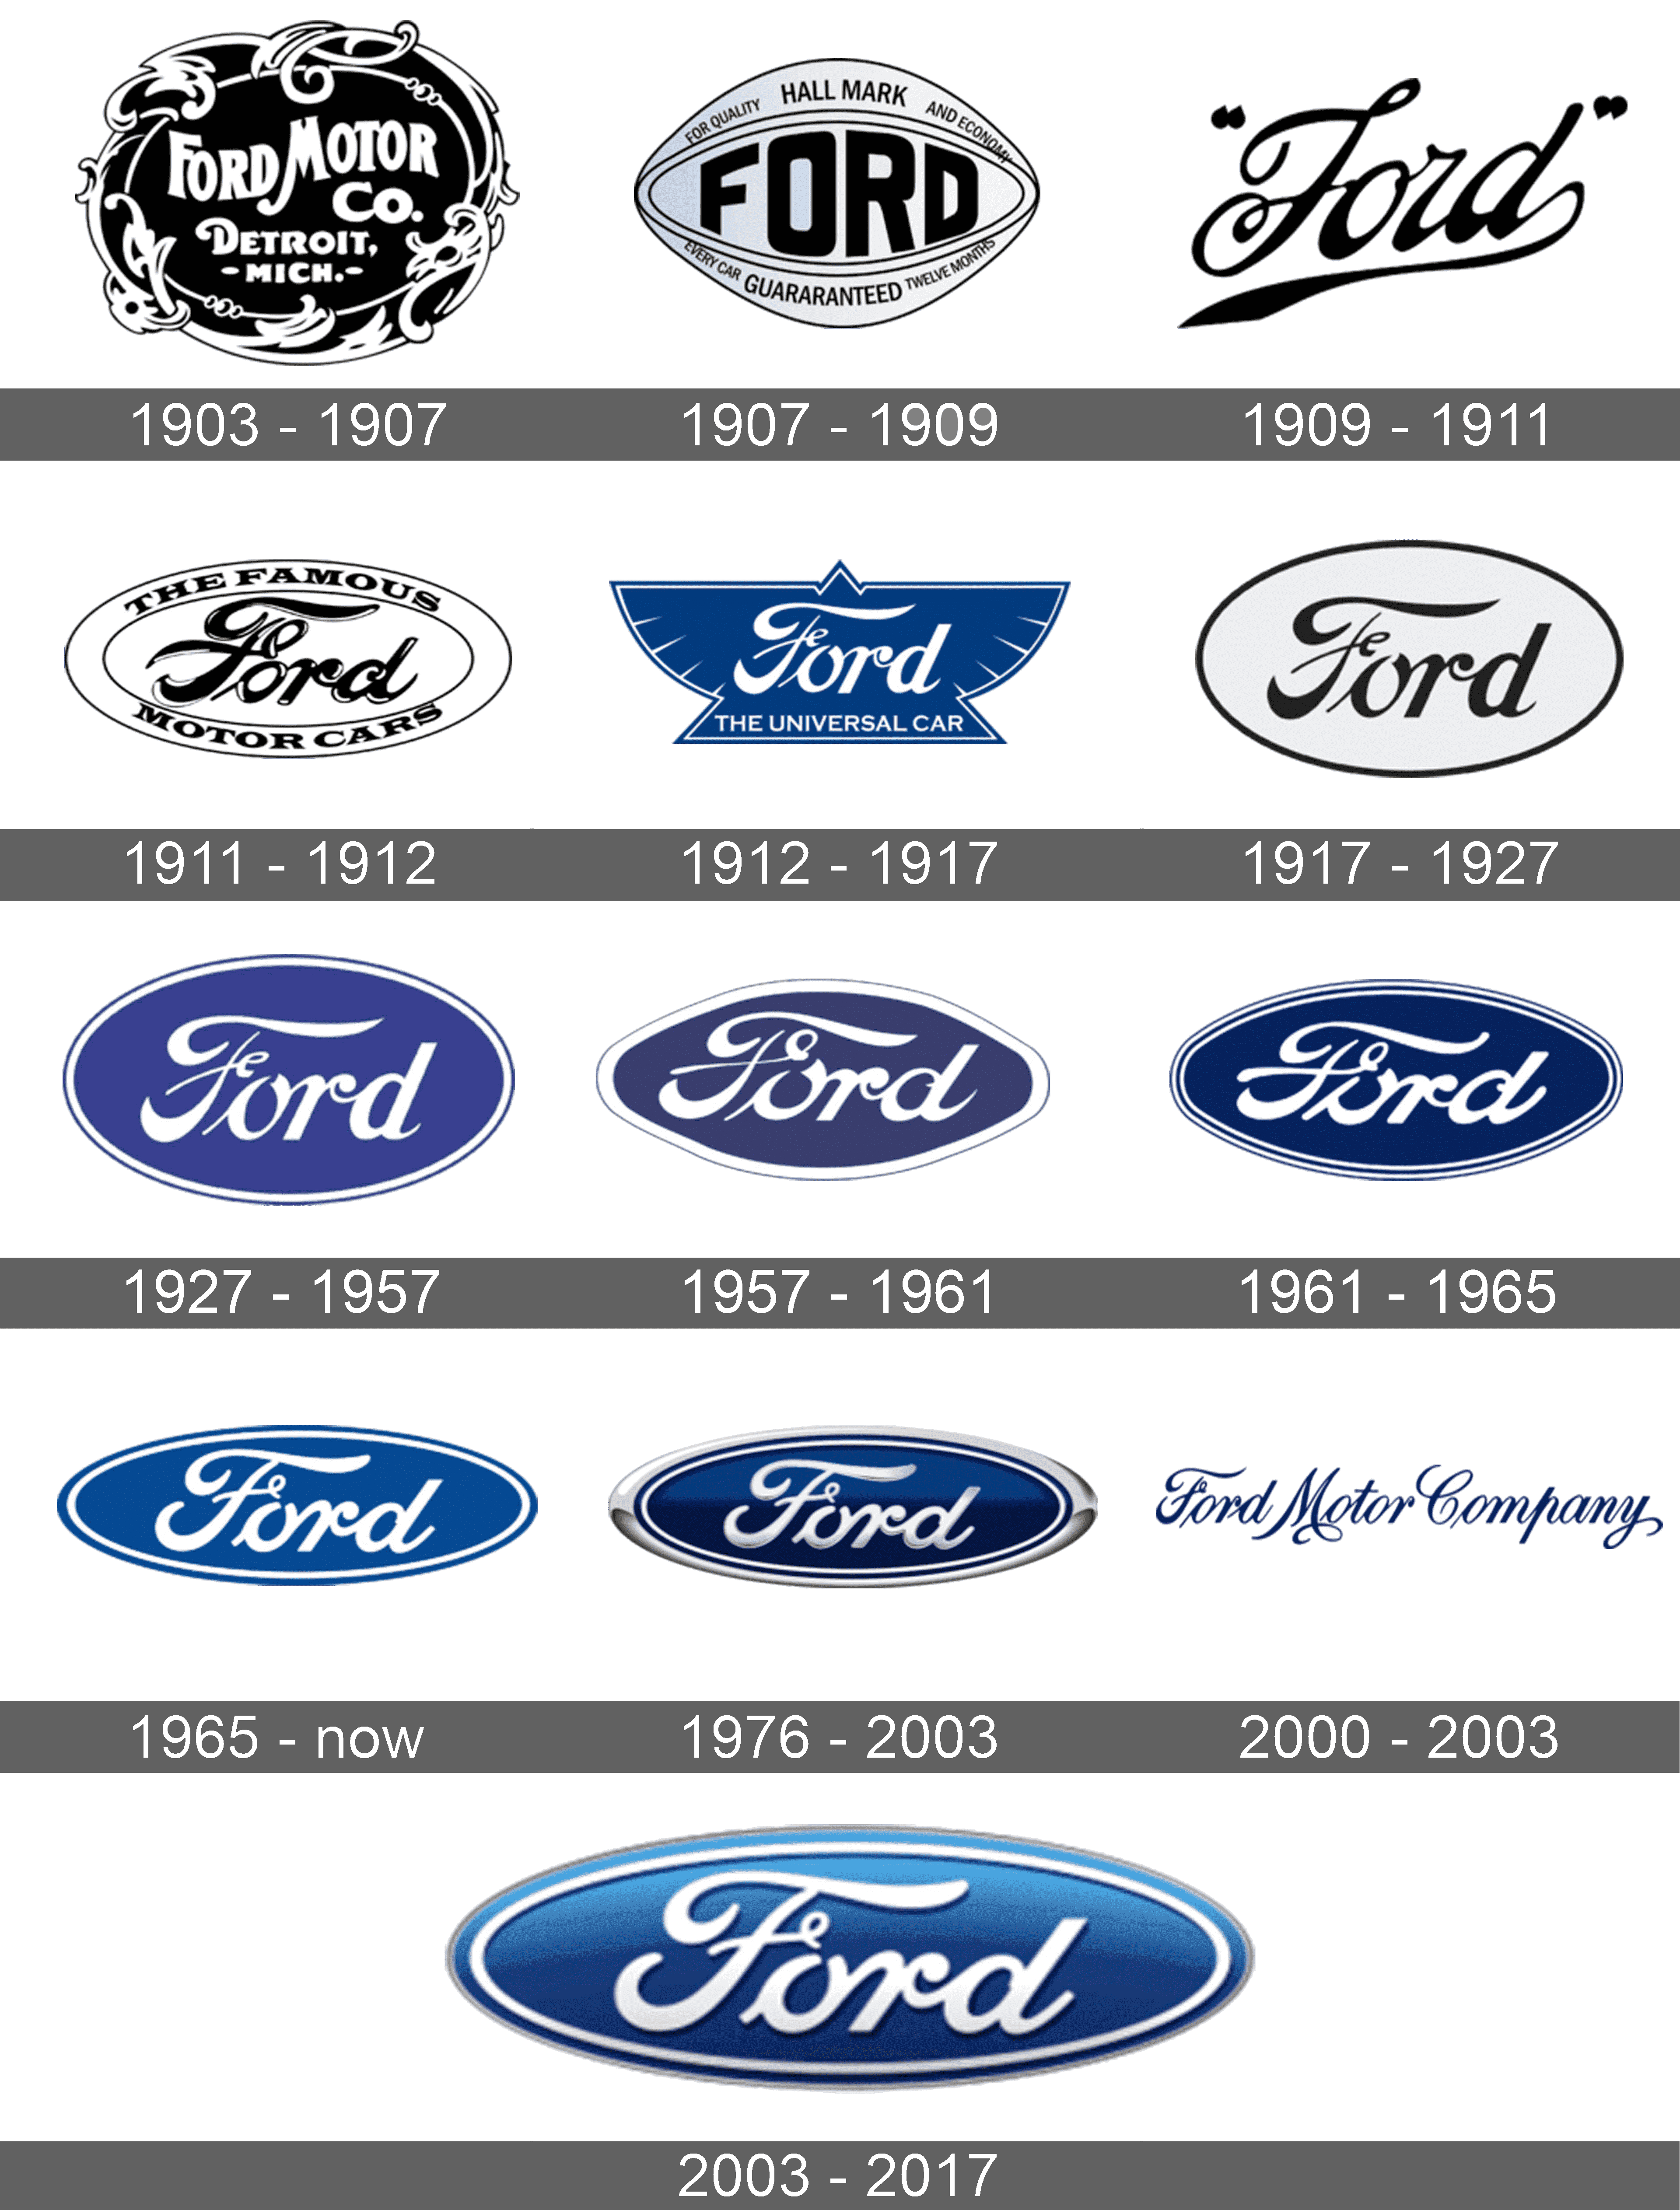 Ford Logo PNG Transparent Images - PNG All